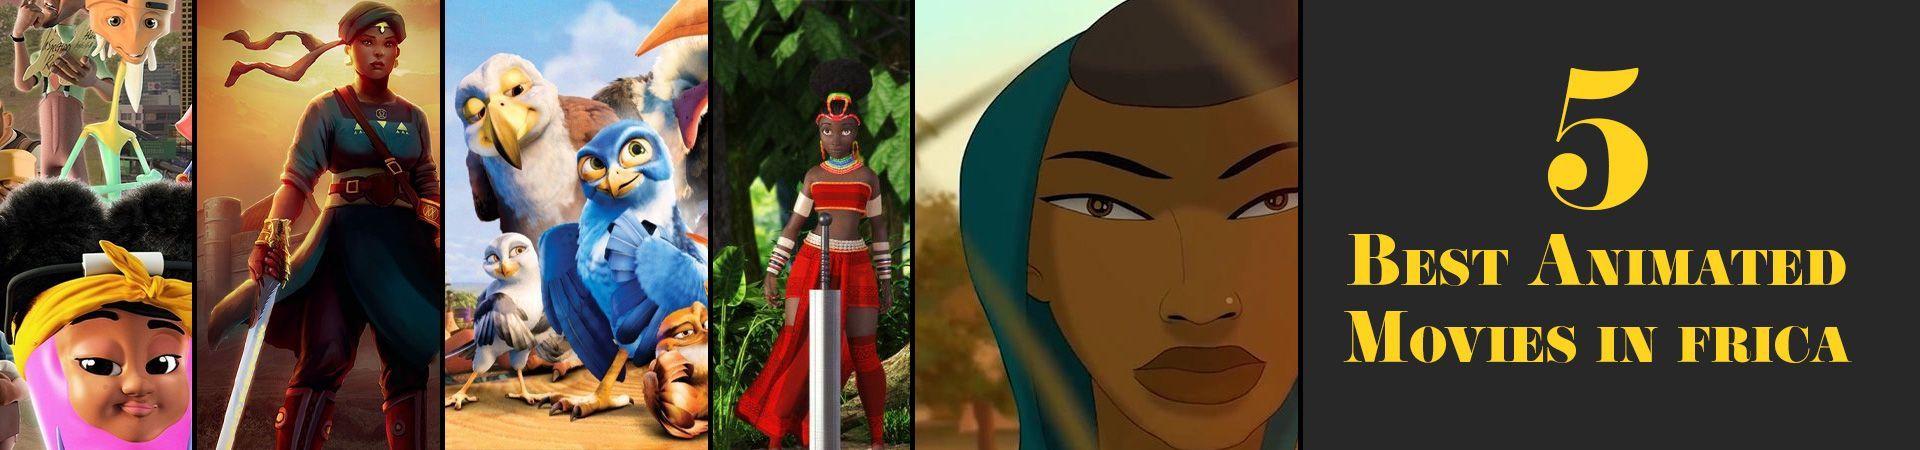 5 Best Animated Movies in Africa | CGAfrica